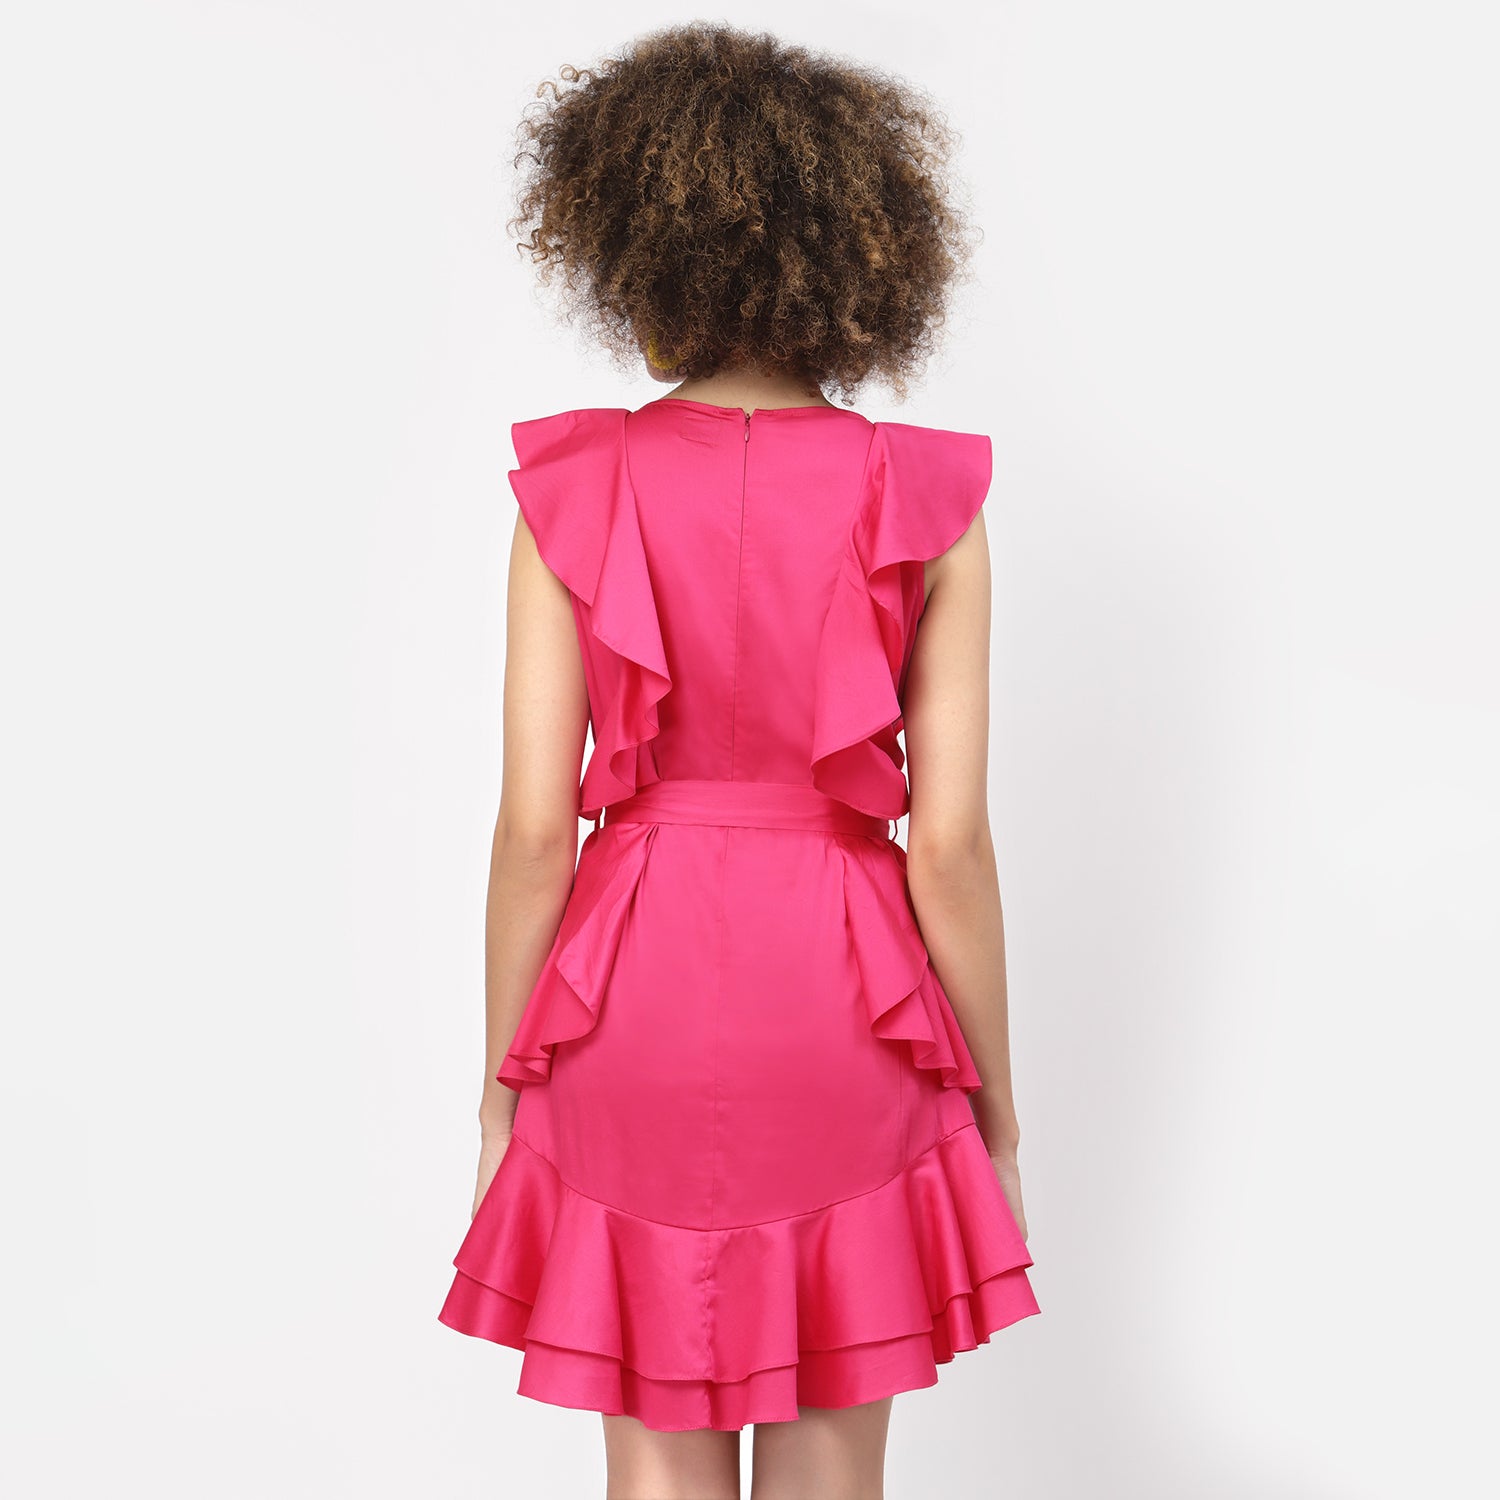 Pink Without Sleeves Frill Dress With Tie Knot